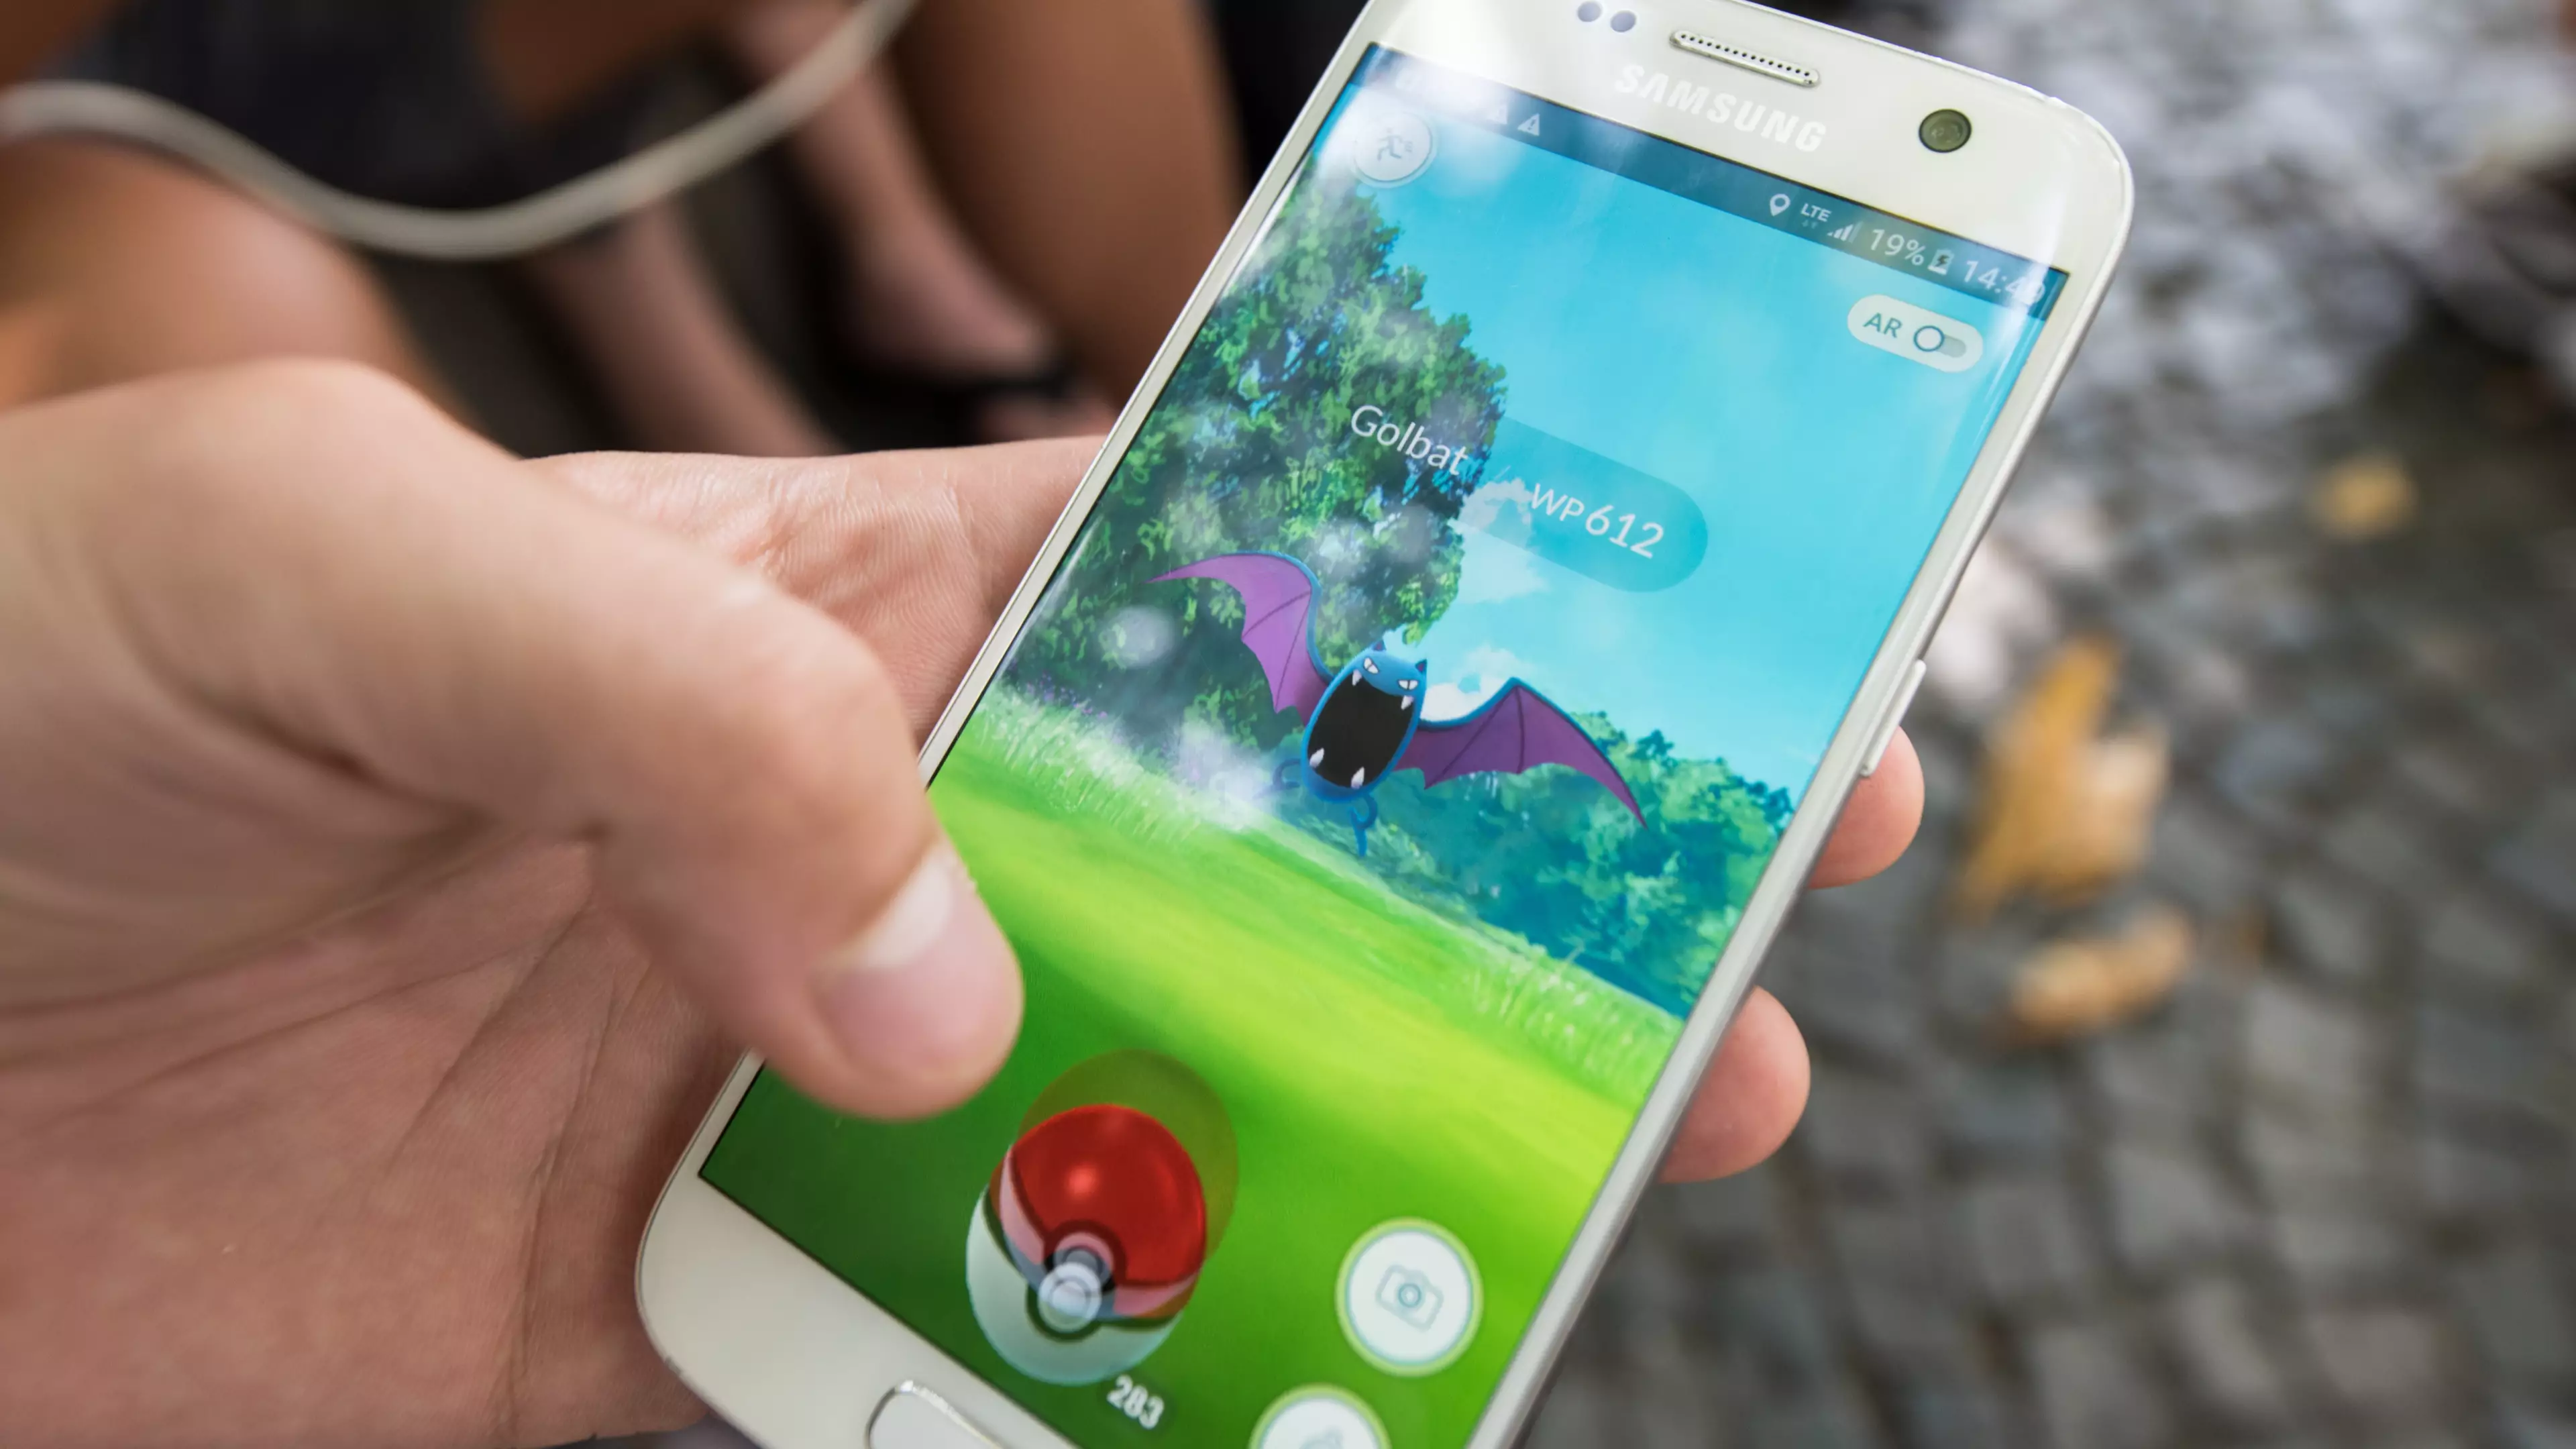 Spanish Pensioner, 77, Fined For ‘Hunting Pokémon’ During Nationwide Lockdown